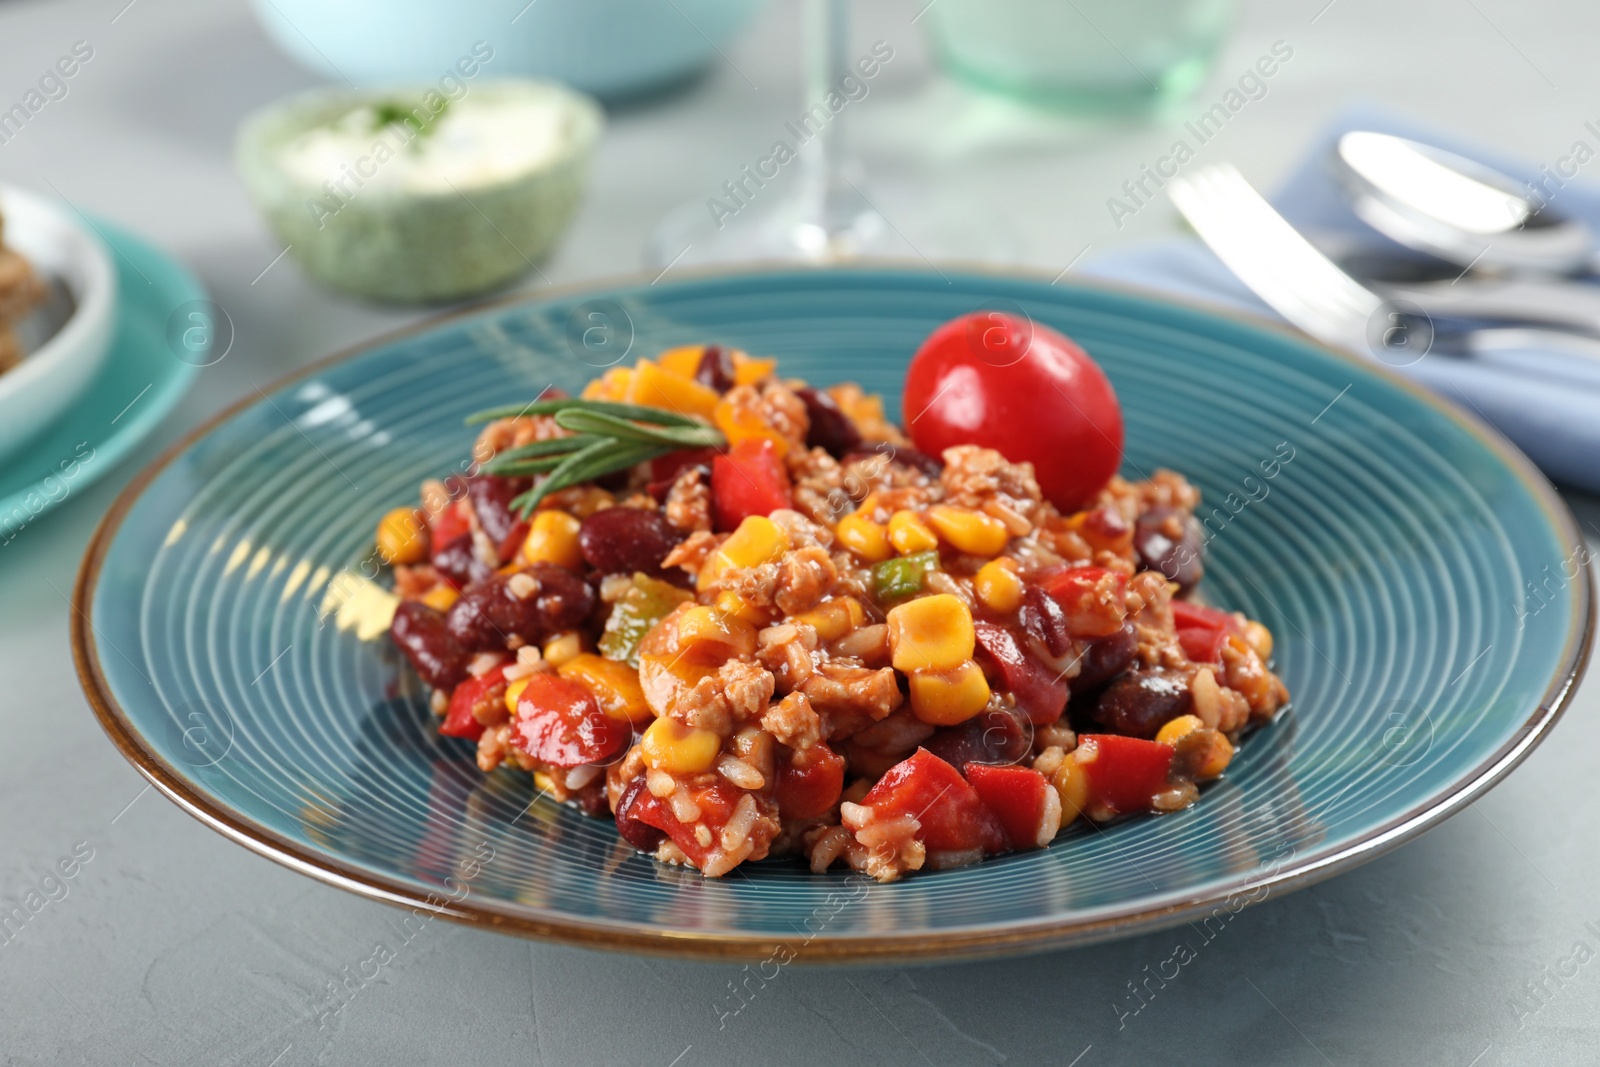 Photo of Plate with tasty chili con carne on gray table